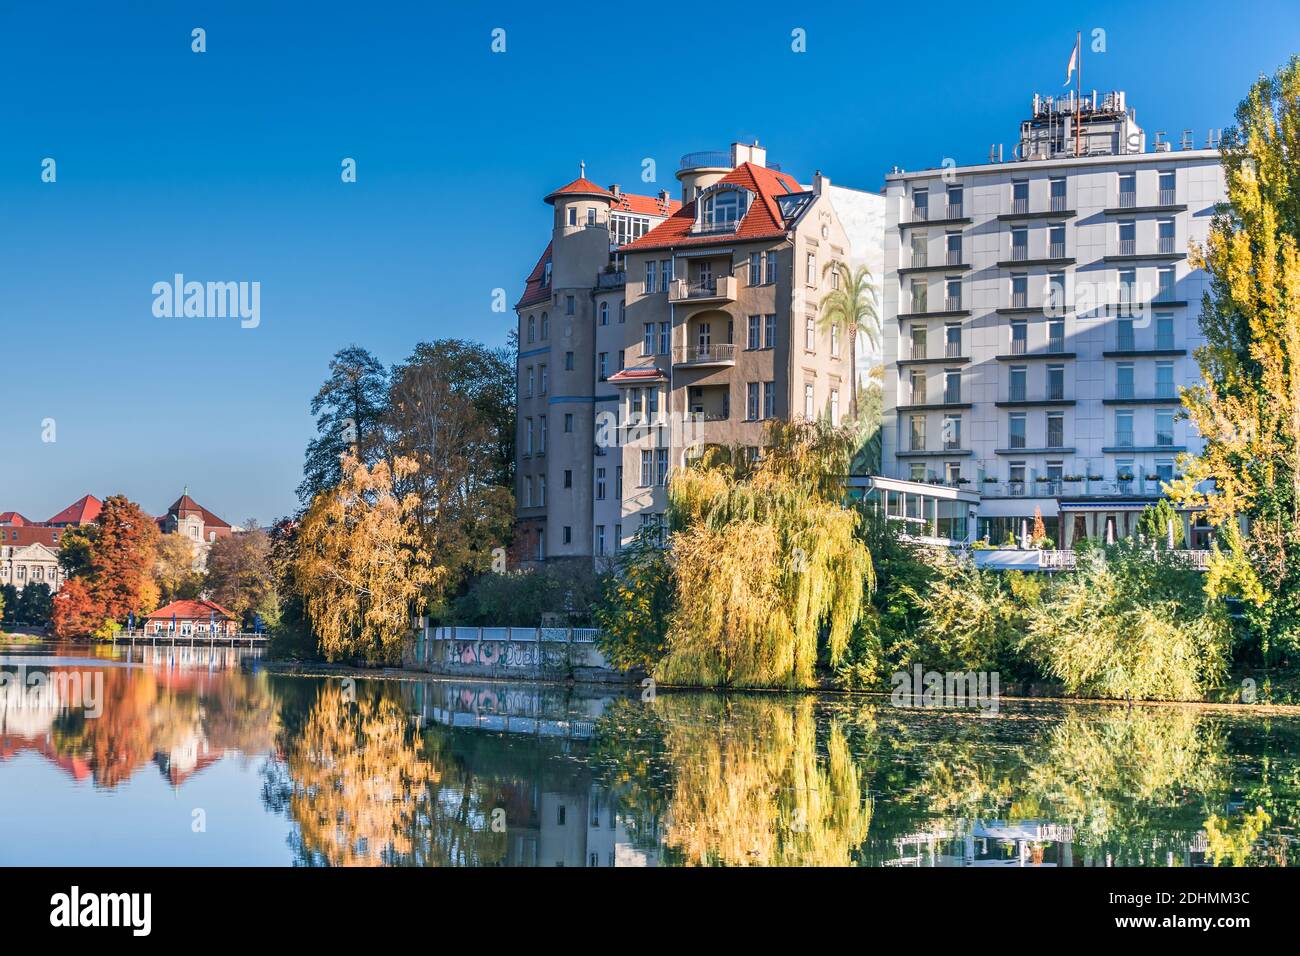 Berlin, Germany - November 7, 2020: Shore of Lake Lietzen with buildings of Bootshaus Stella, Pension Kammern am See and Ringhotel Seehof Stock Photo